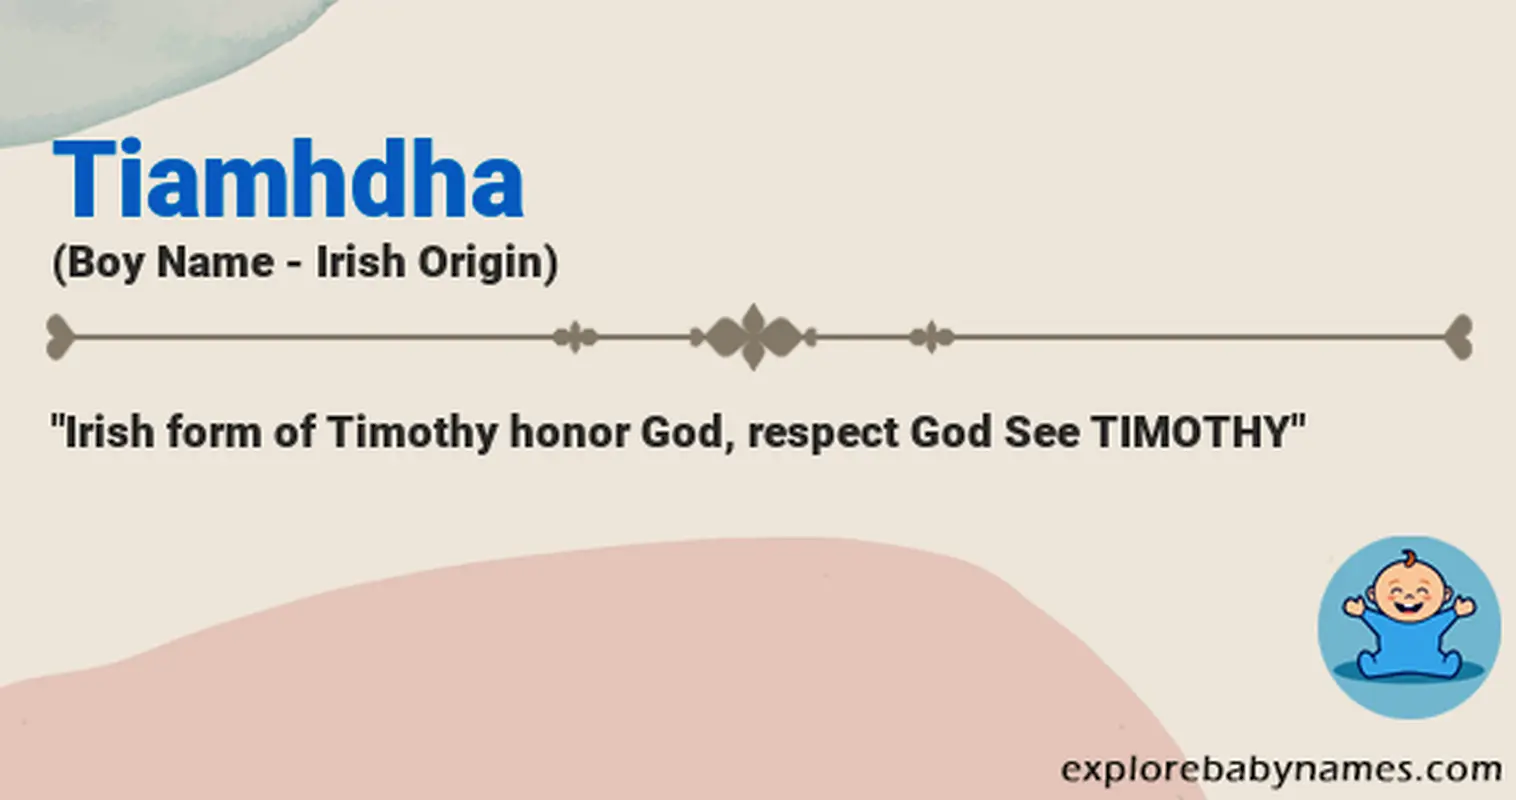 Meaning of Tiamhdha